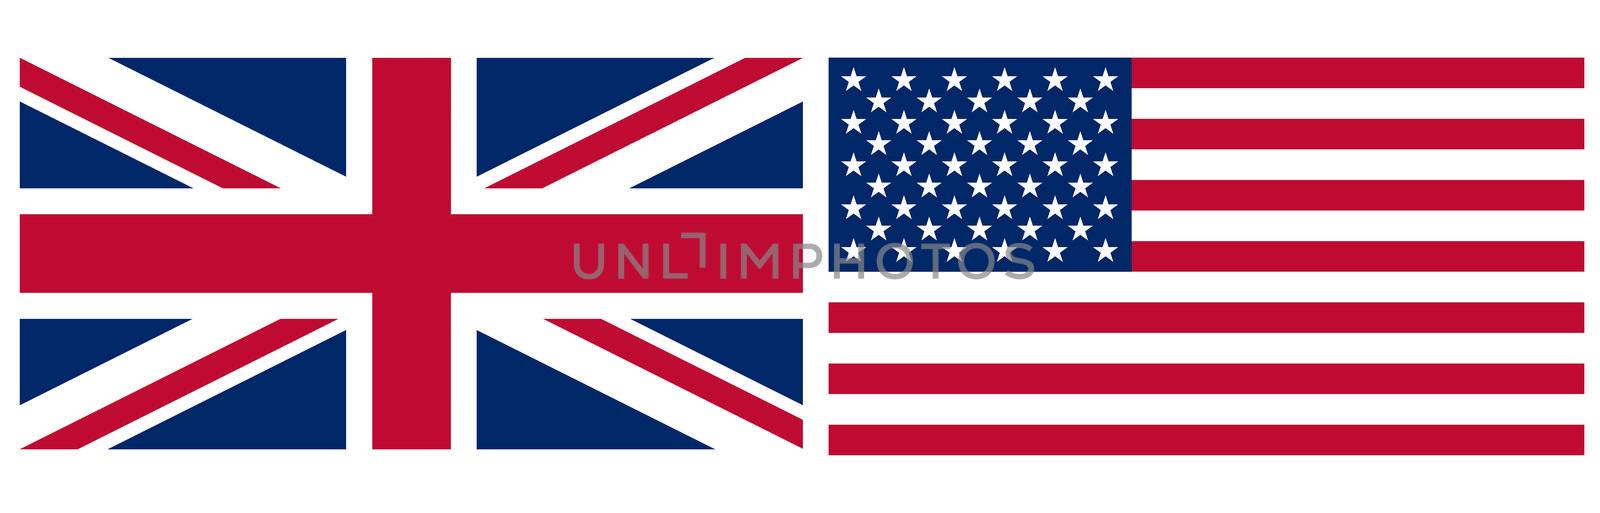 flags, Uk and USA by ozaiachin